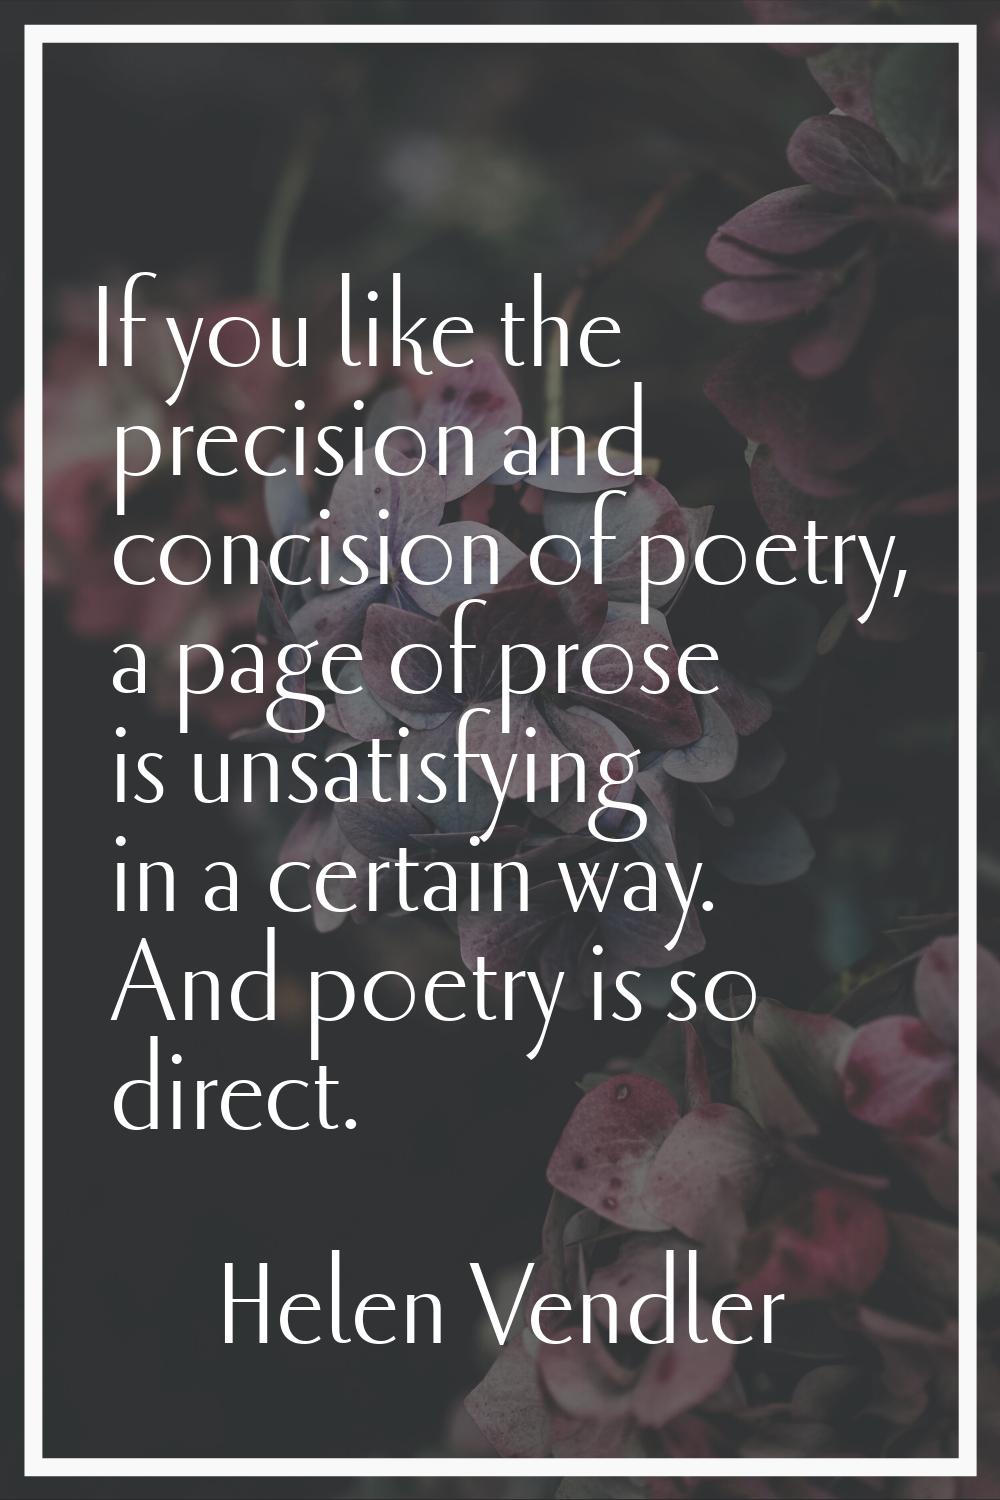 If you like the precision and concision of poetry, a page of prose is unsatisfying in a certain way